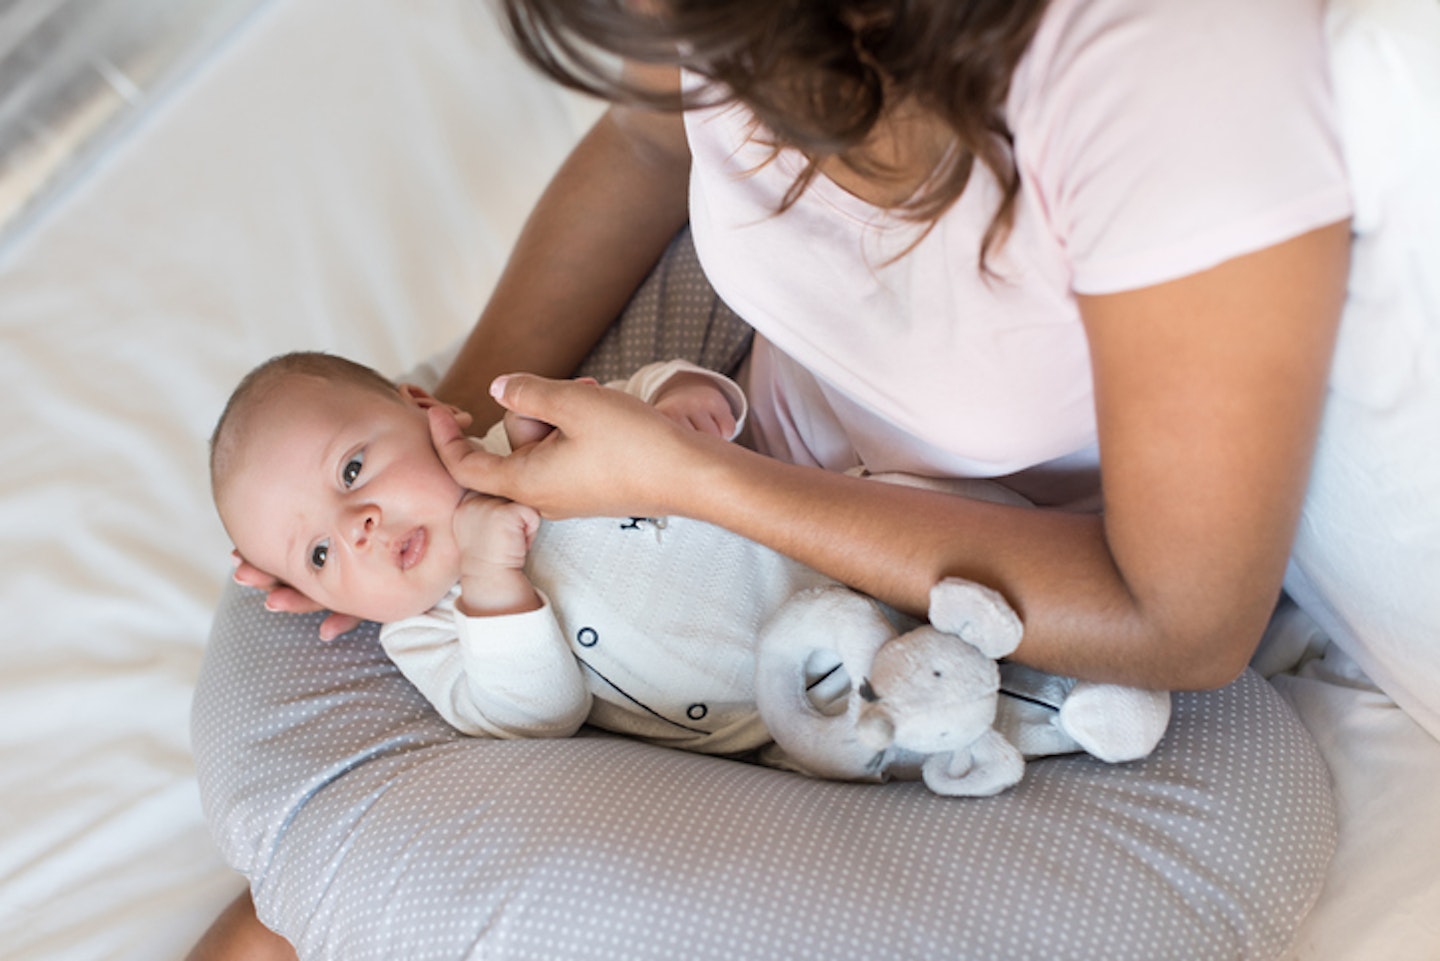 https://images.bauerhosting.com/affiliates/sites/12/2022/11/Mother-with-baby-on-nursing-pillow.jpg?ar=16%3A9&fit=crop&crop=top&auto=format&w=1440&q=80